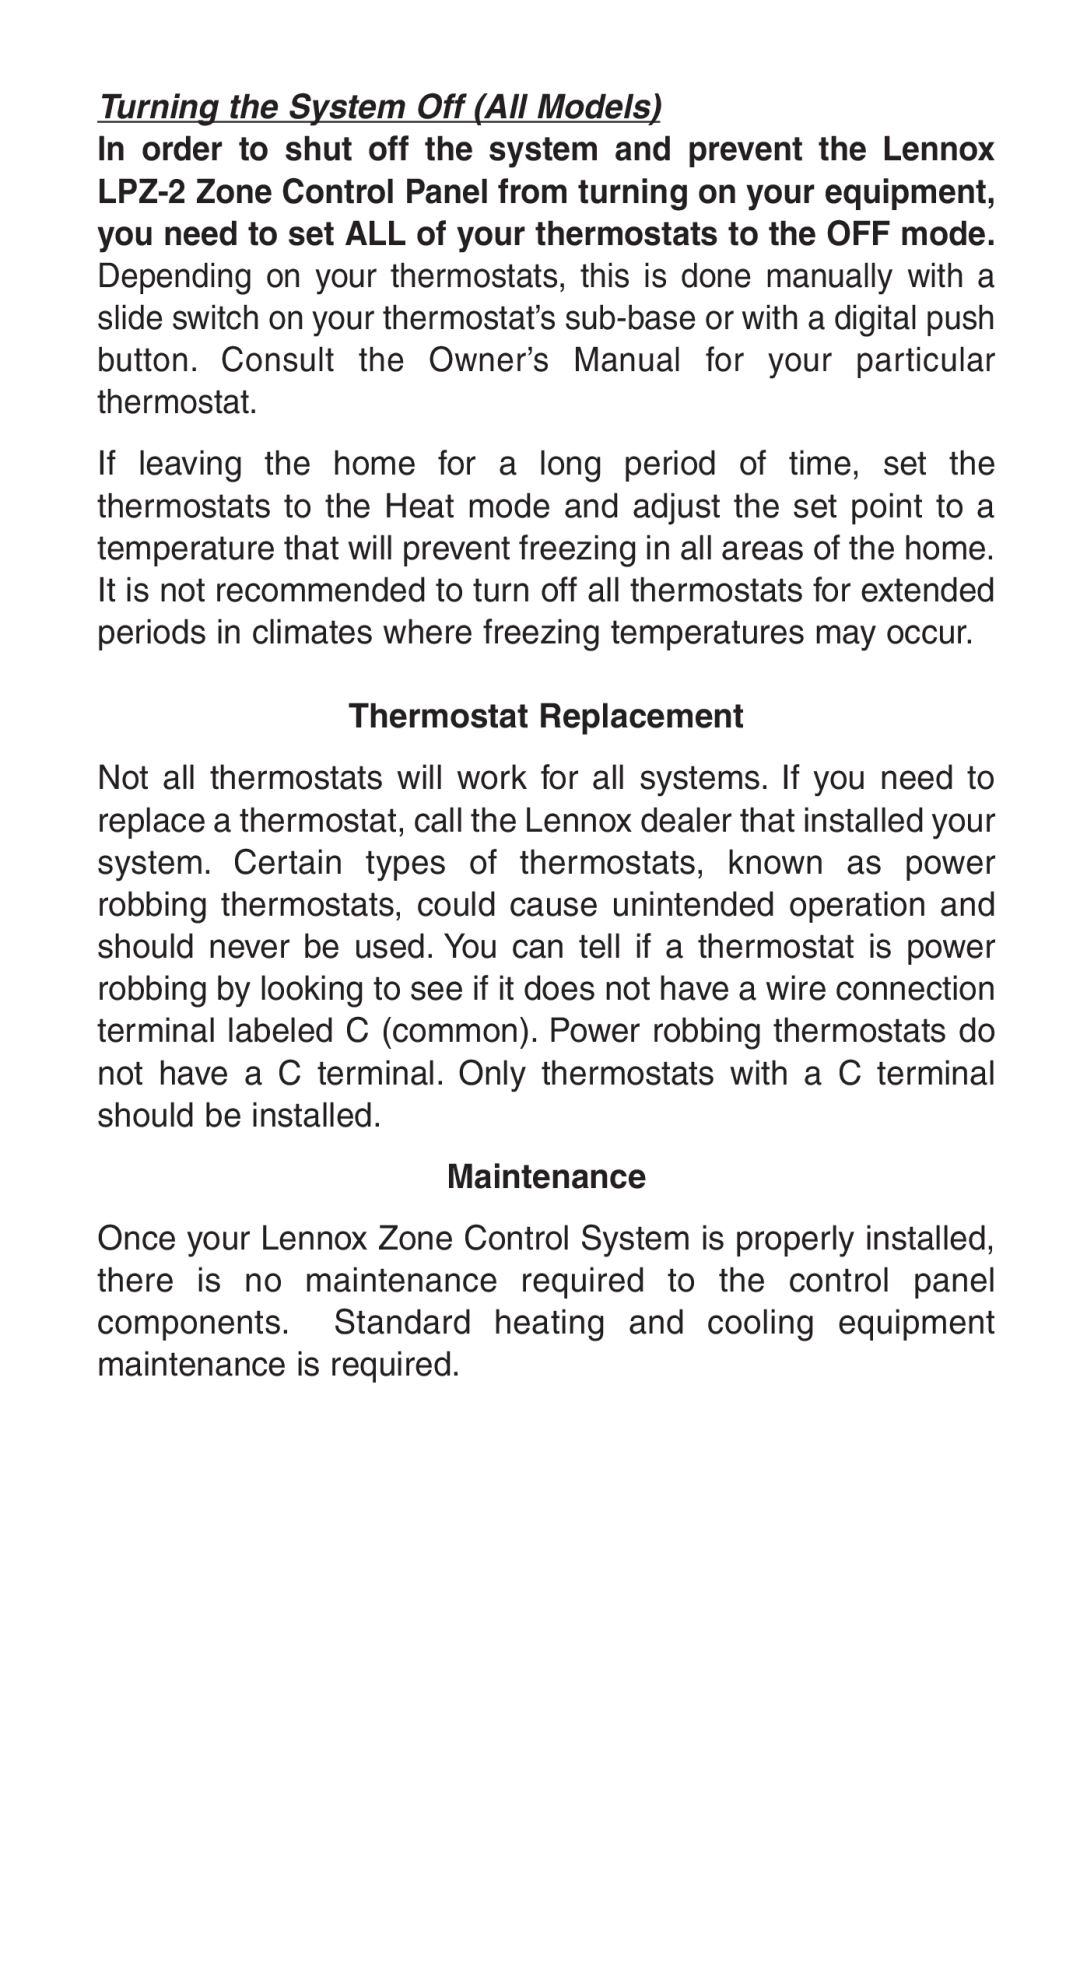 Lennox International Inc HVAC Zone Control, LZP-2 Turning the System Off All Models, Thermostat Replacement, Maintenance 